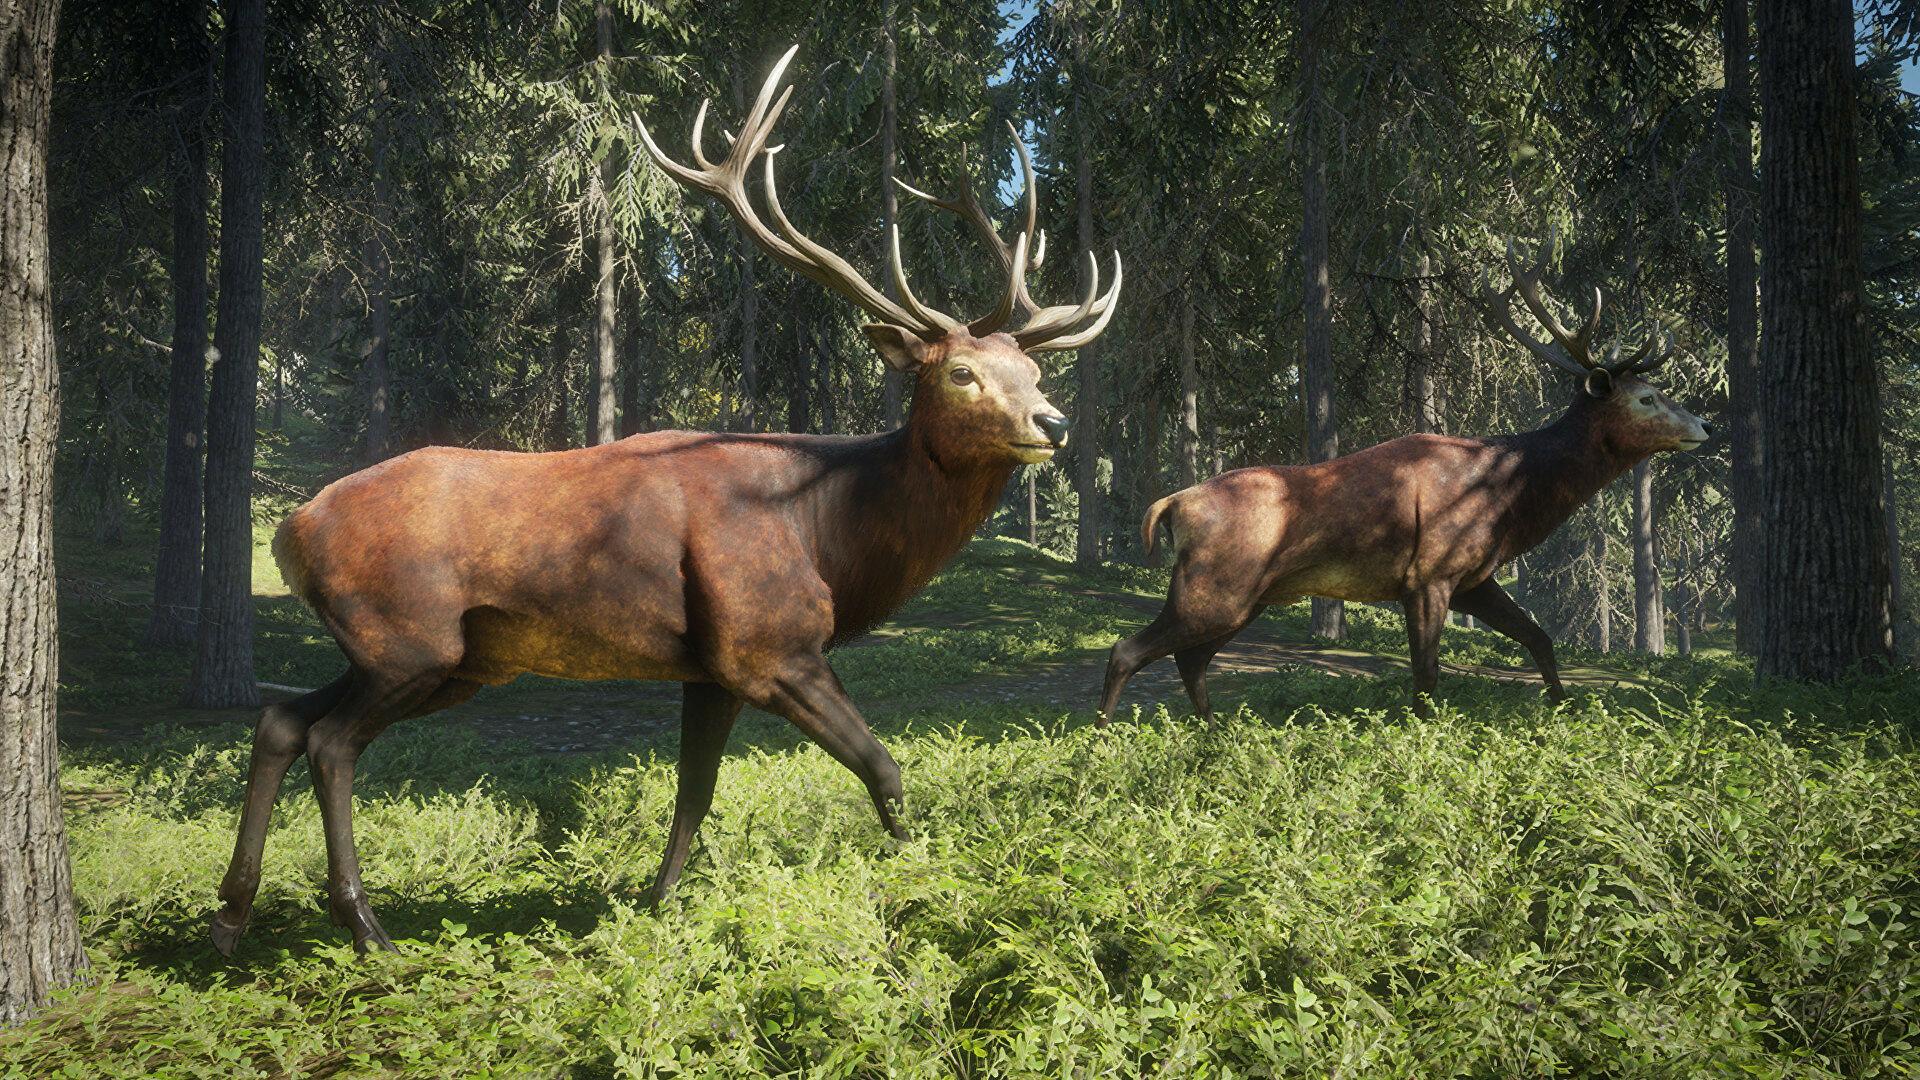 Stalking deer in theHunter: Call Of The Wild helps stave off social media-induced brain rot